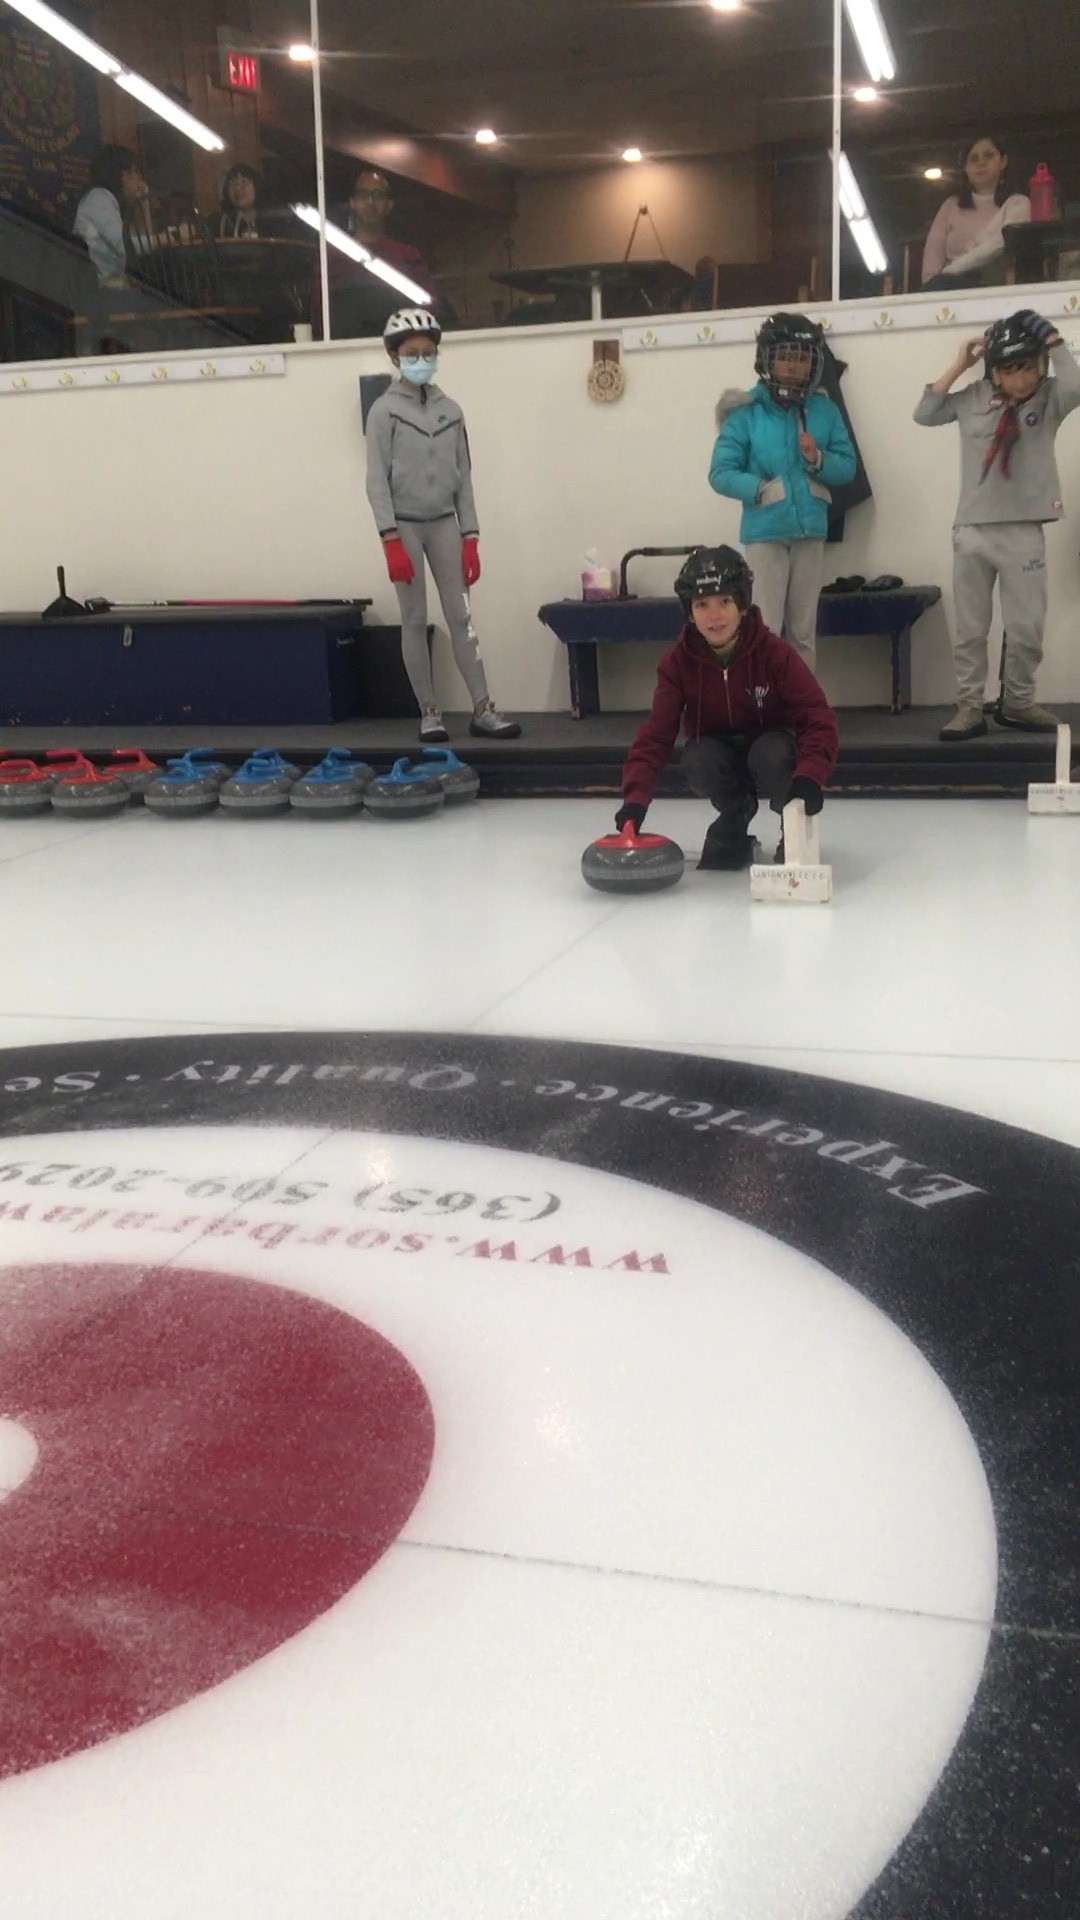 Curling_Cropped_and_Combined_720p.mp4